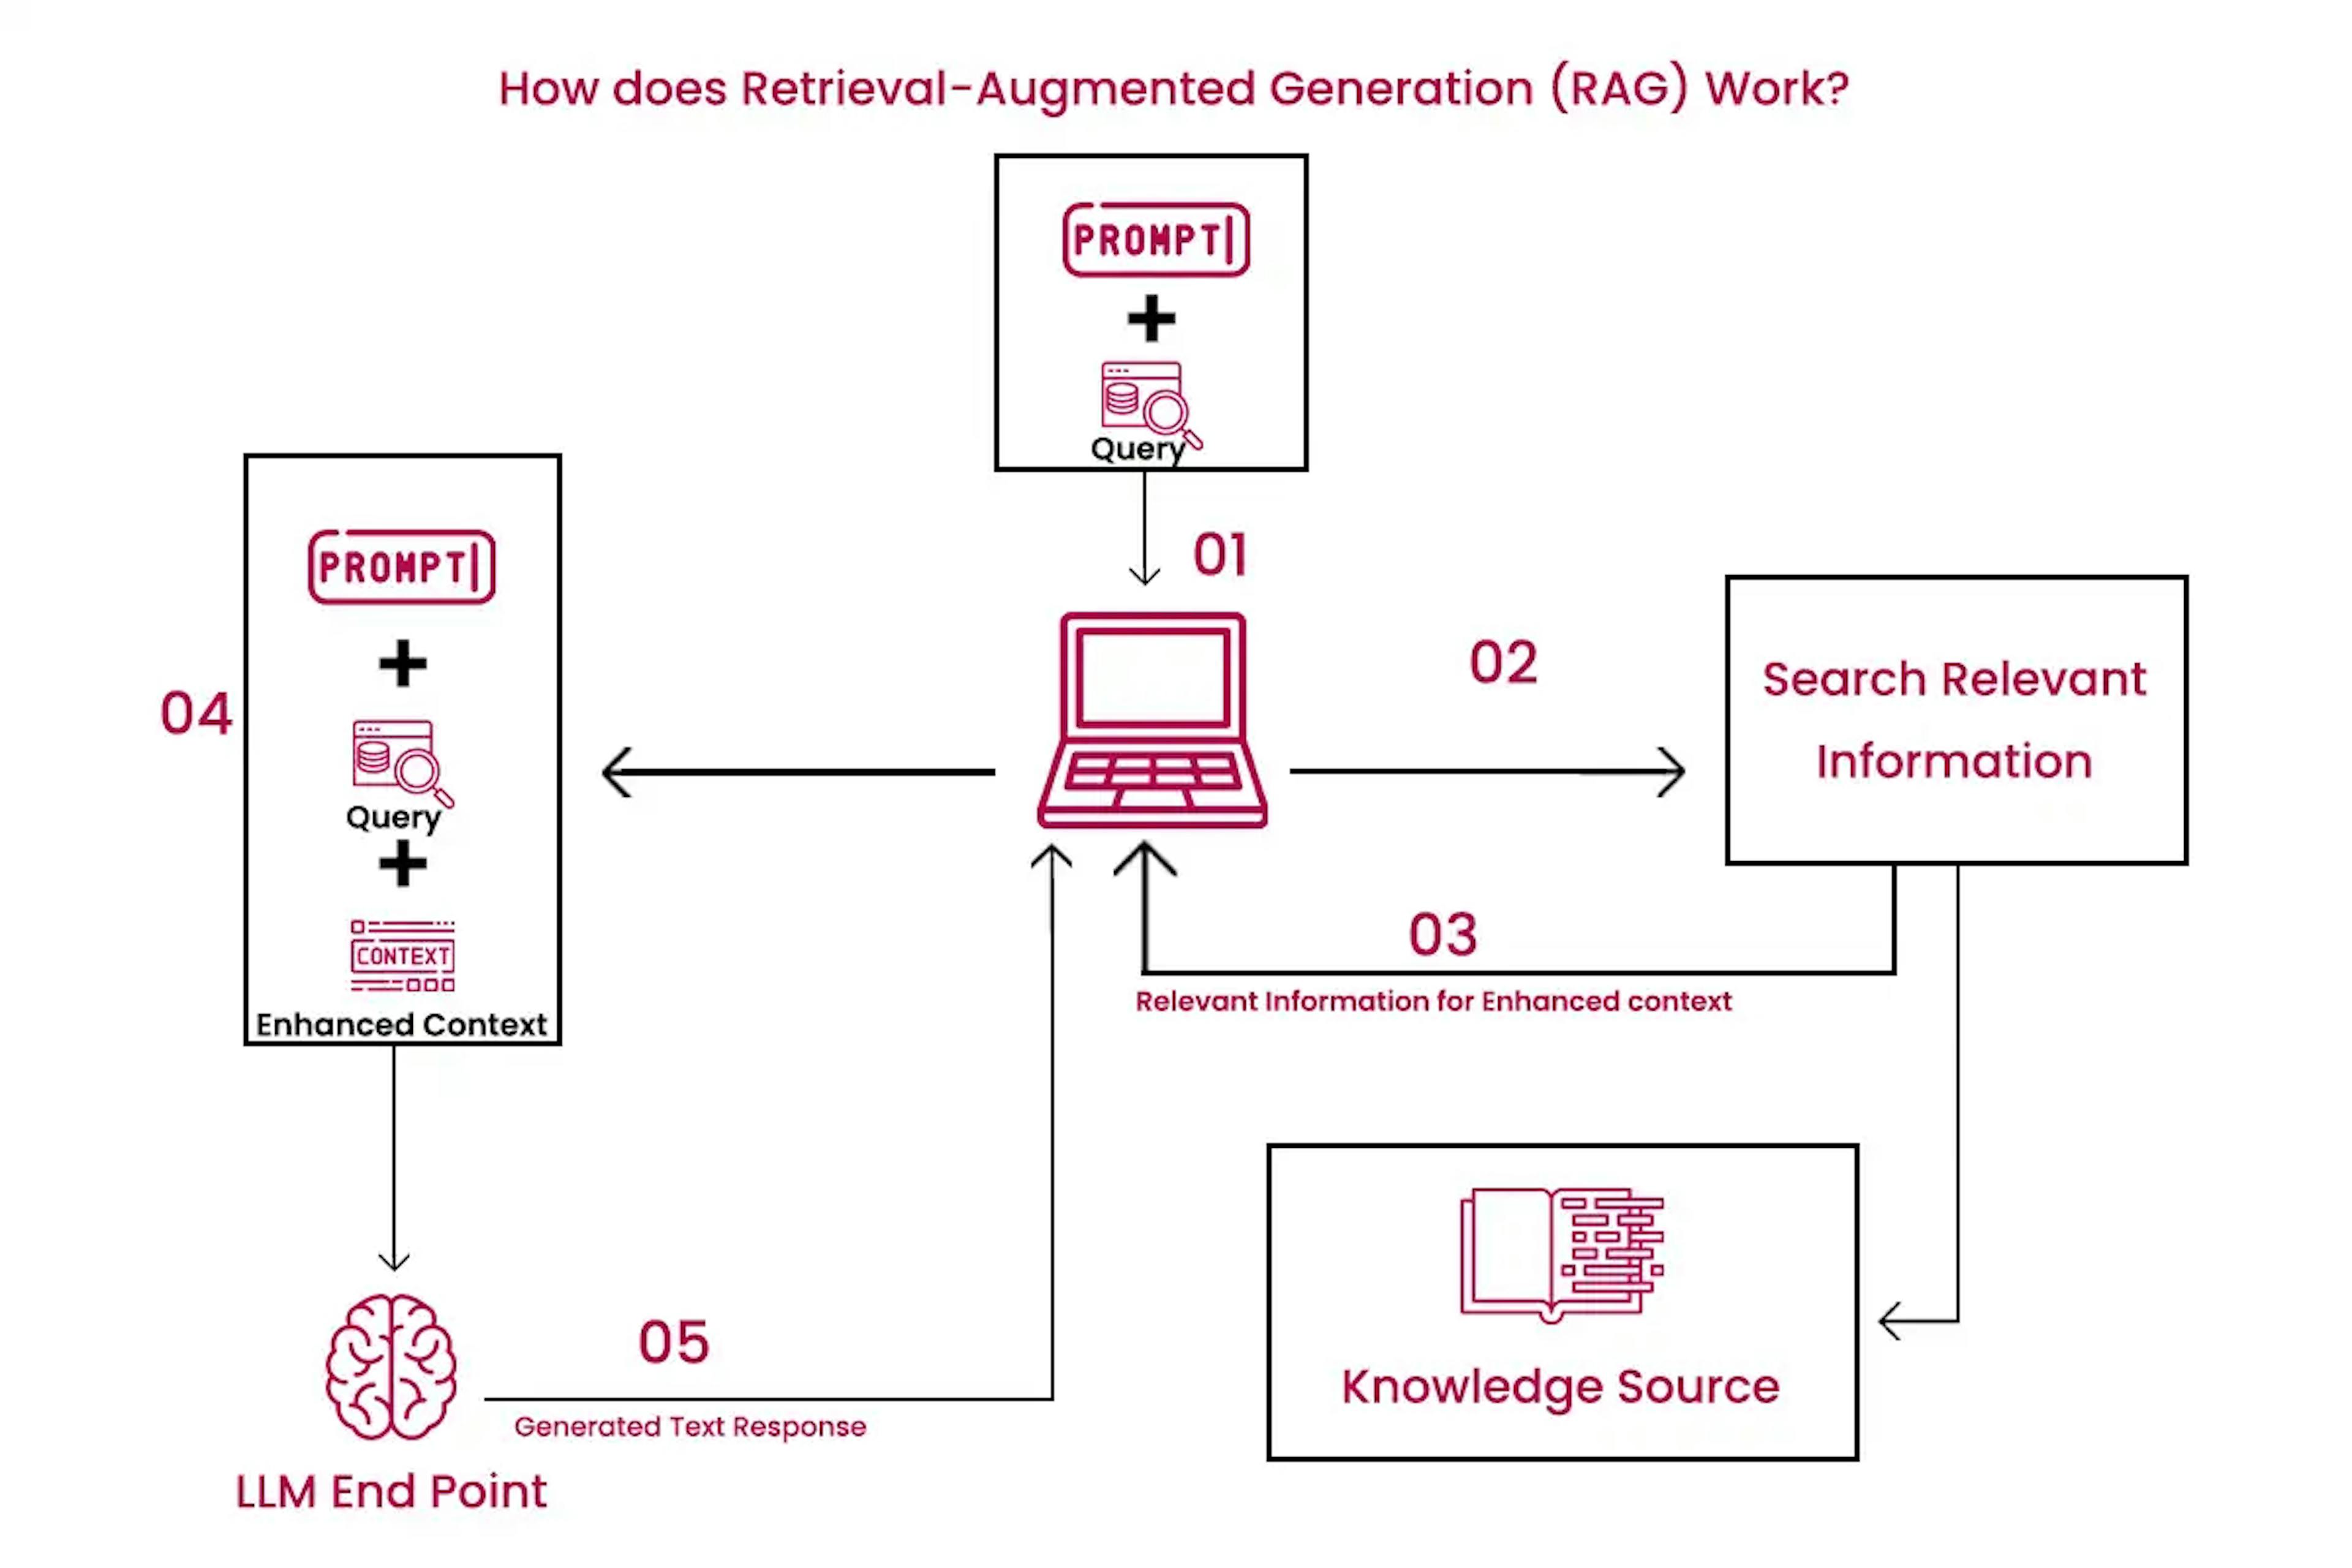 How does Retrieval-Augmented Generation (RAG) Work?